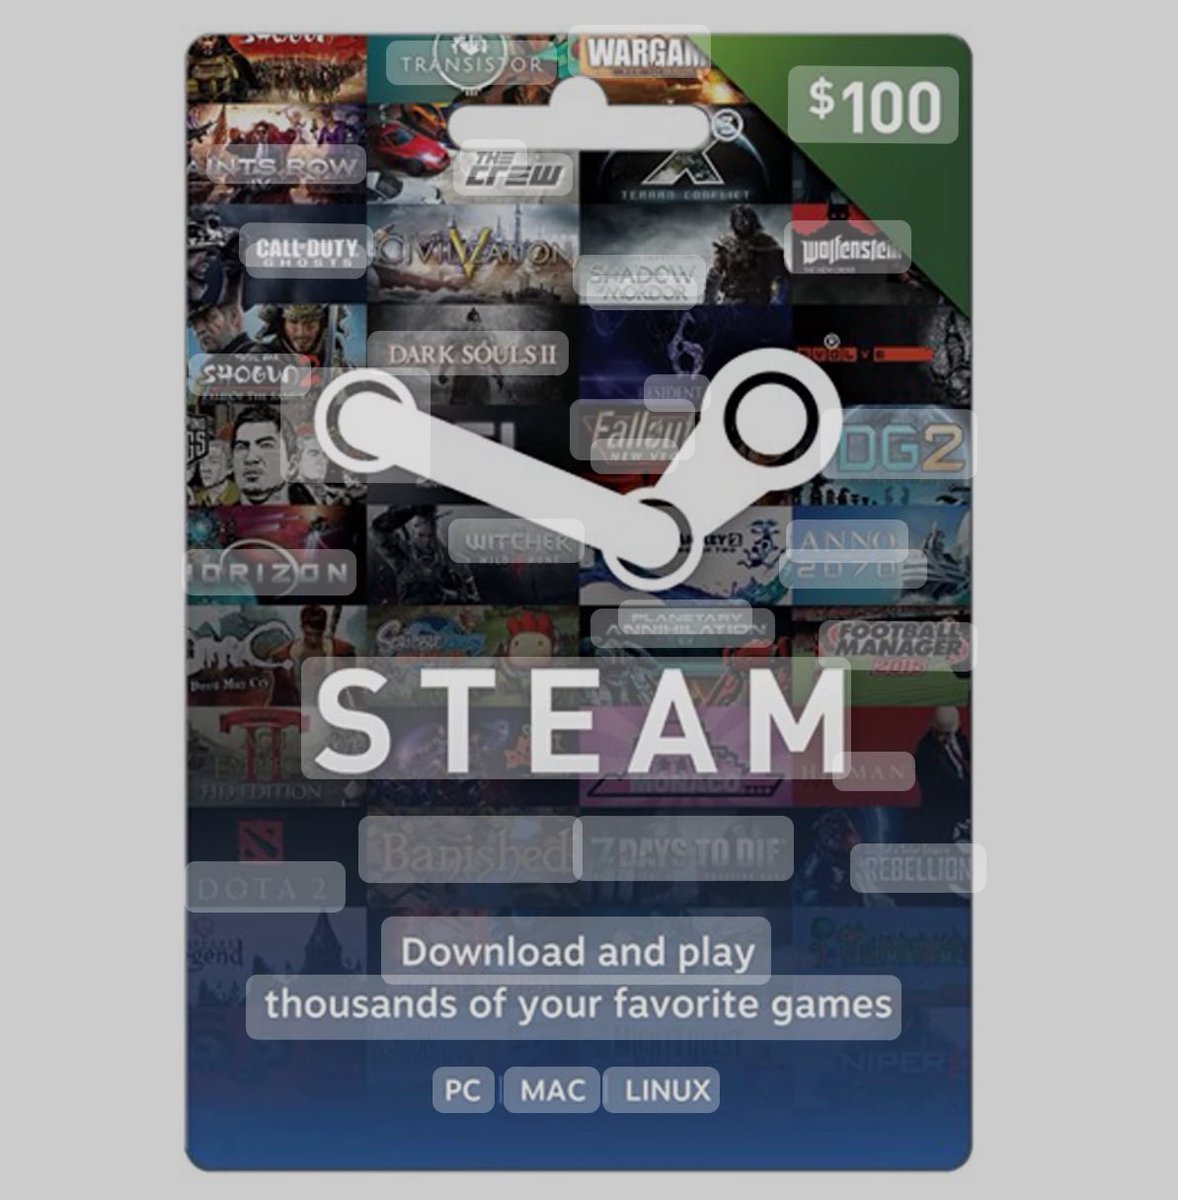 $100 Steam Gift Card Giveaway - RT + Like - Follow @VastGG + 🔔 Ends in 24 hours.